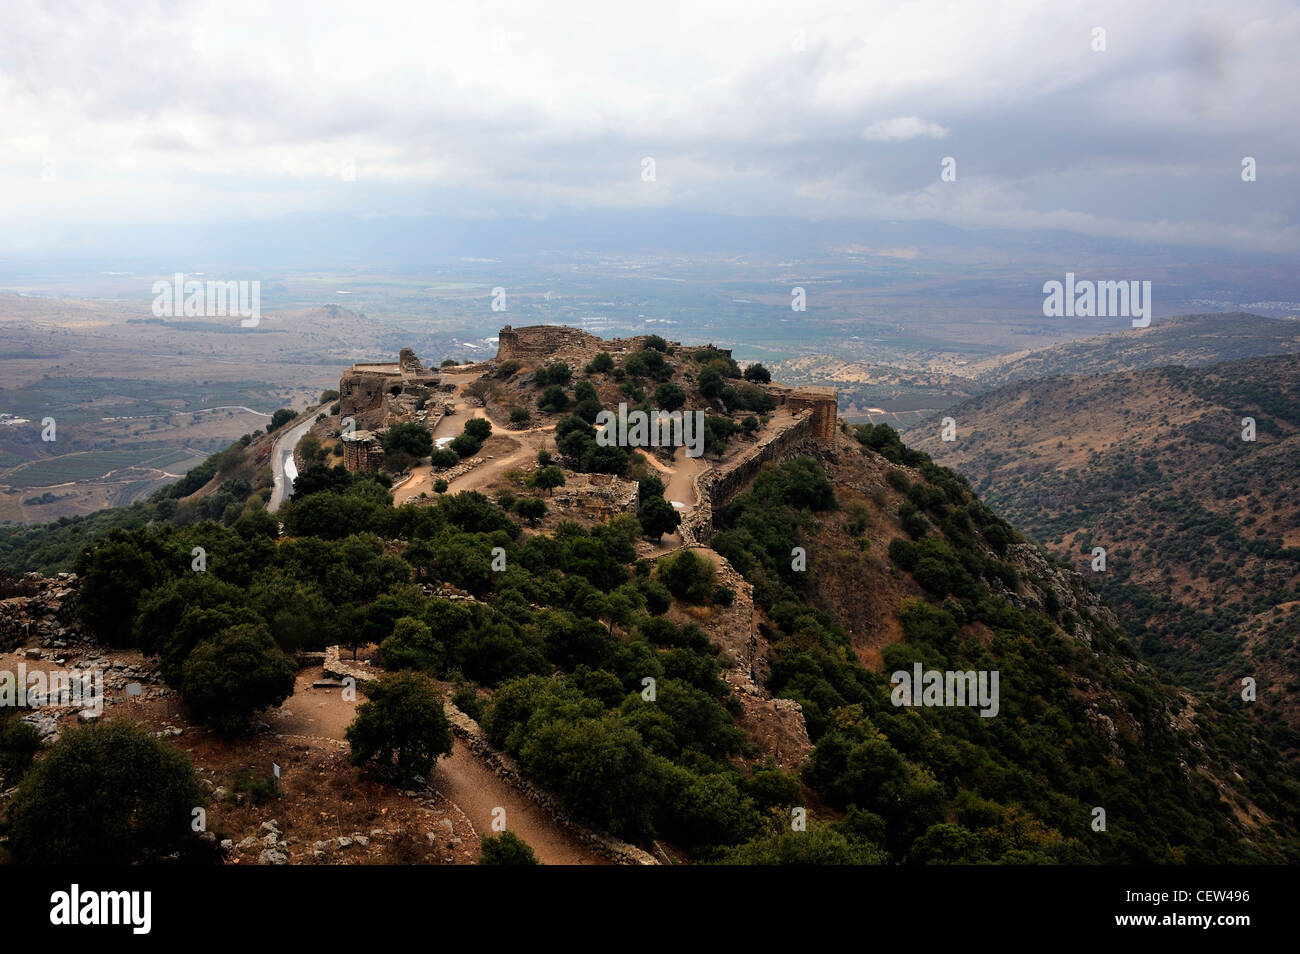 View of the Nimrod Fortress from Mount Hermon on the Golan Heights, and the Jordan valley in the background Stock Photo